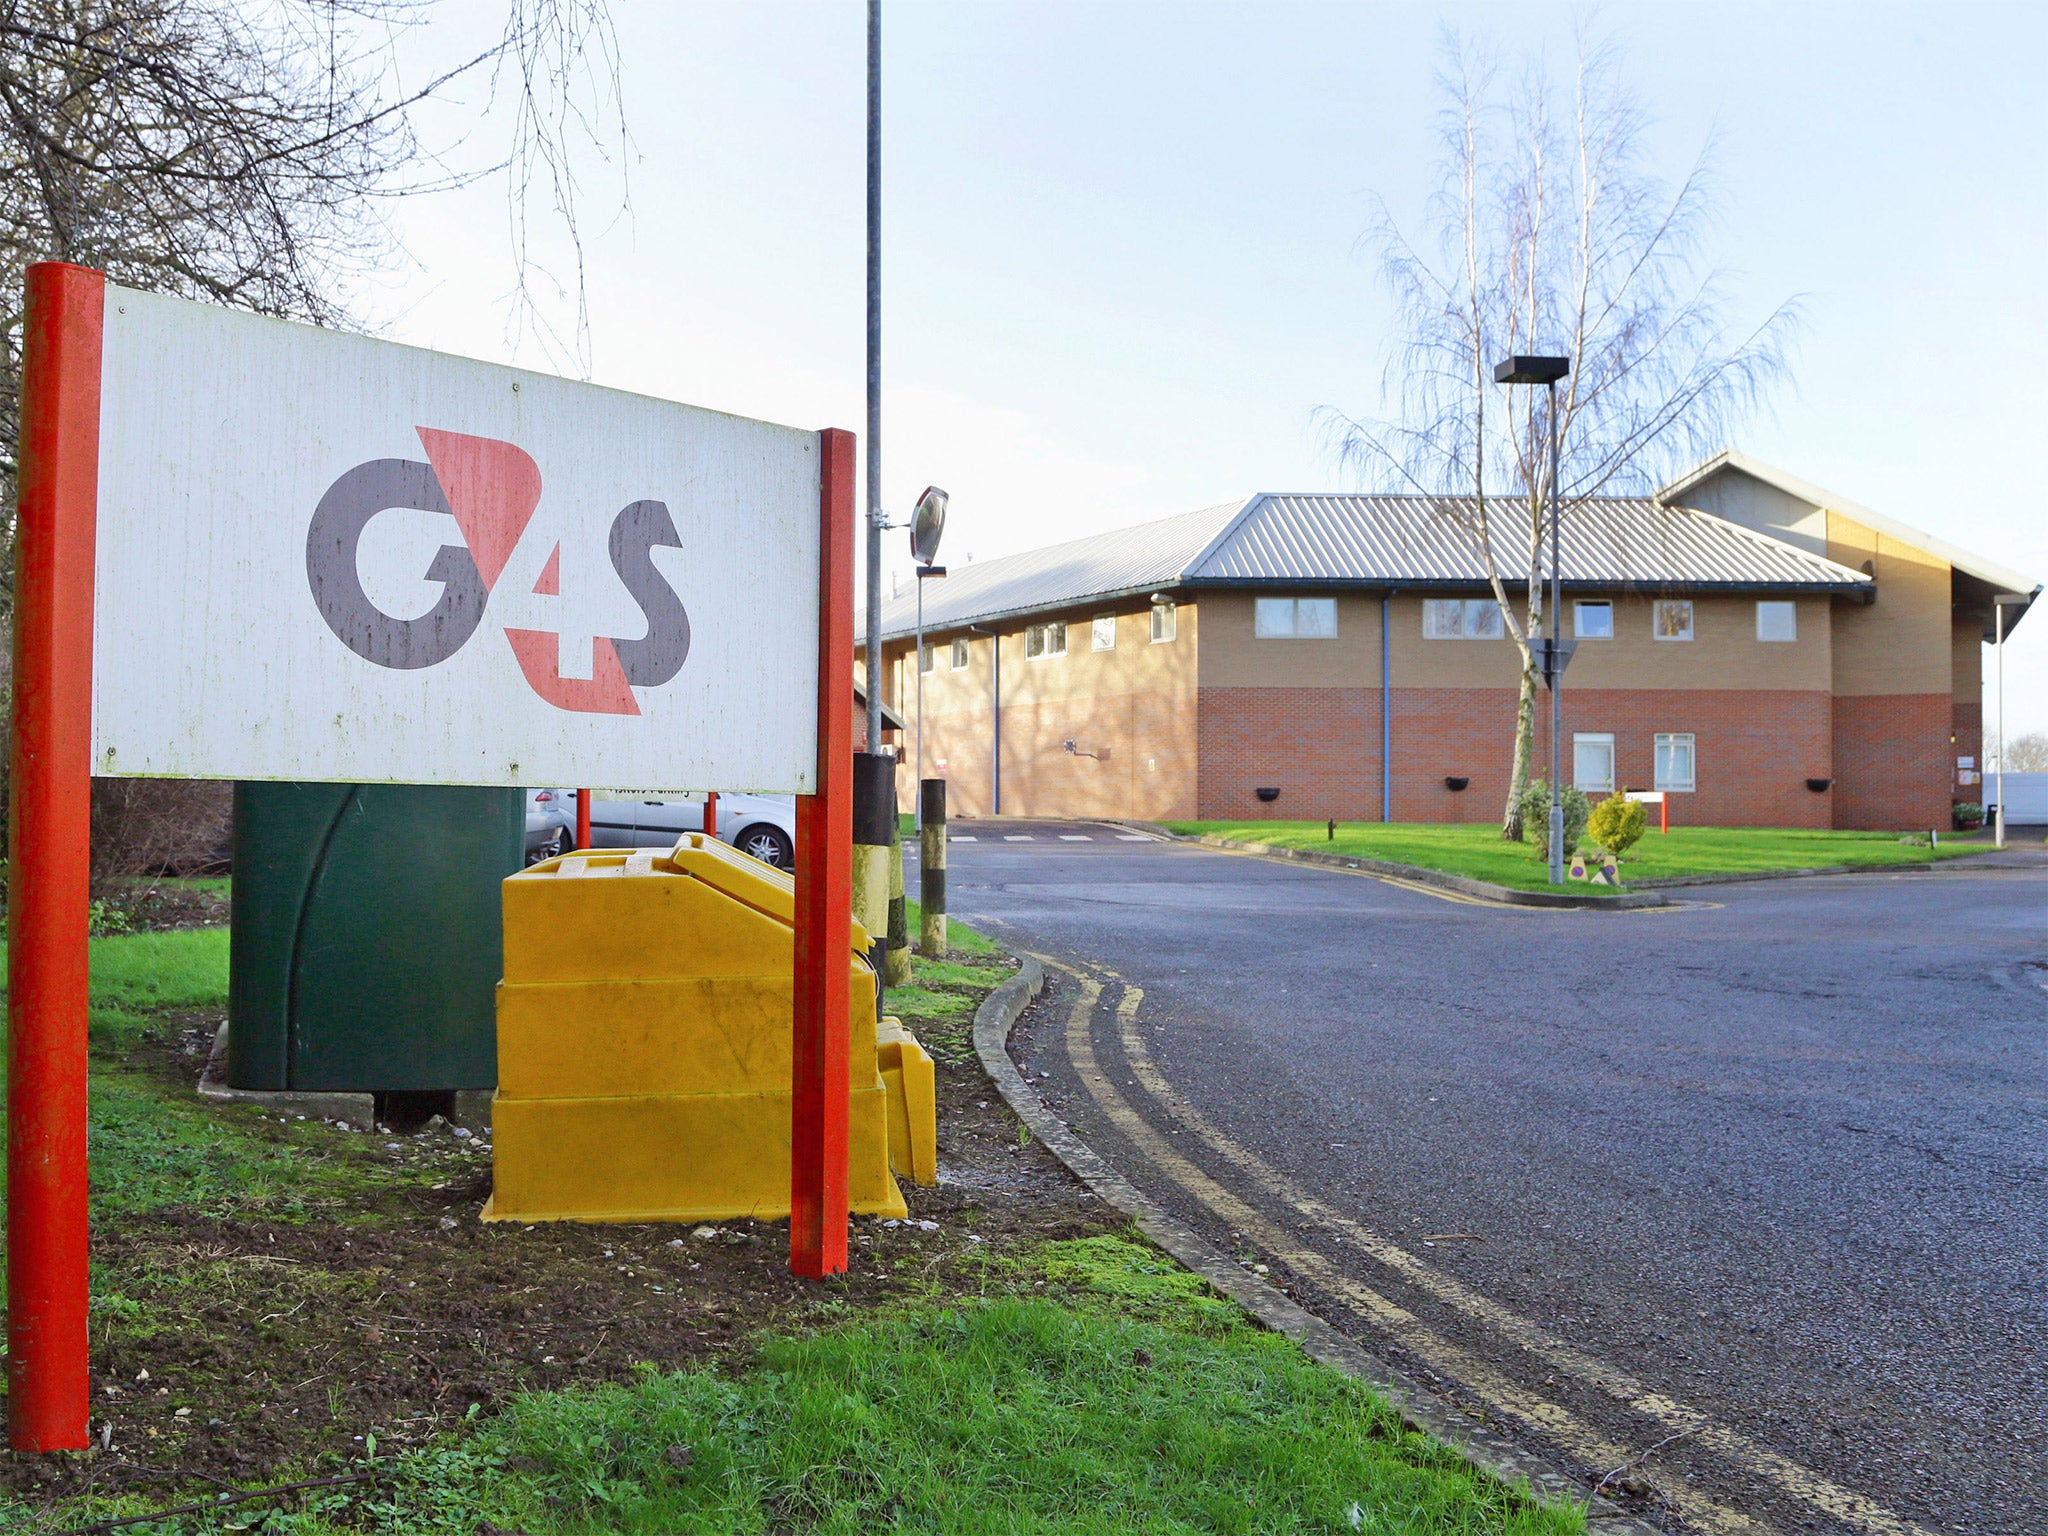 The staff at Lincolnshire Police force were employed by G4S